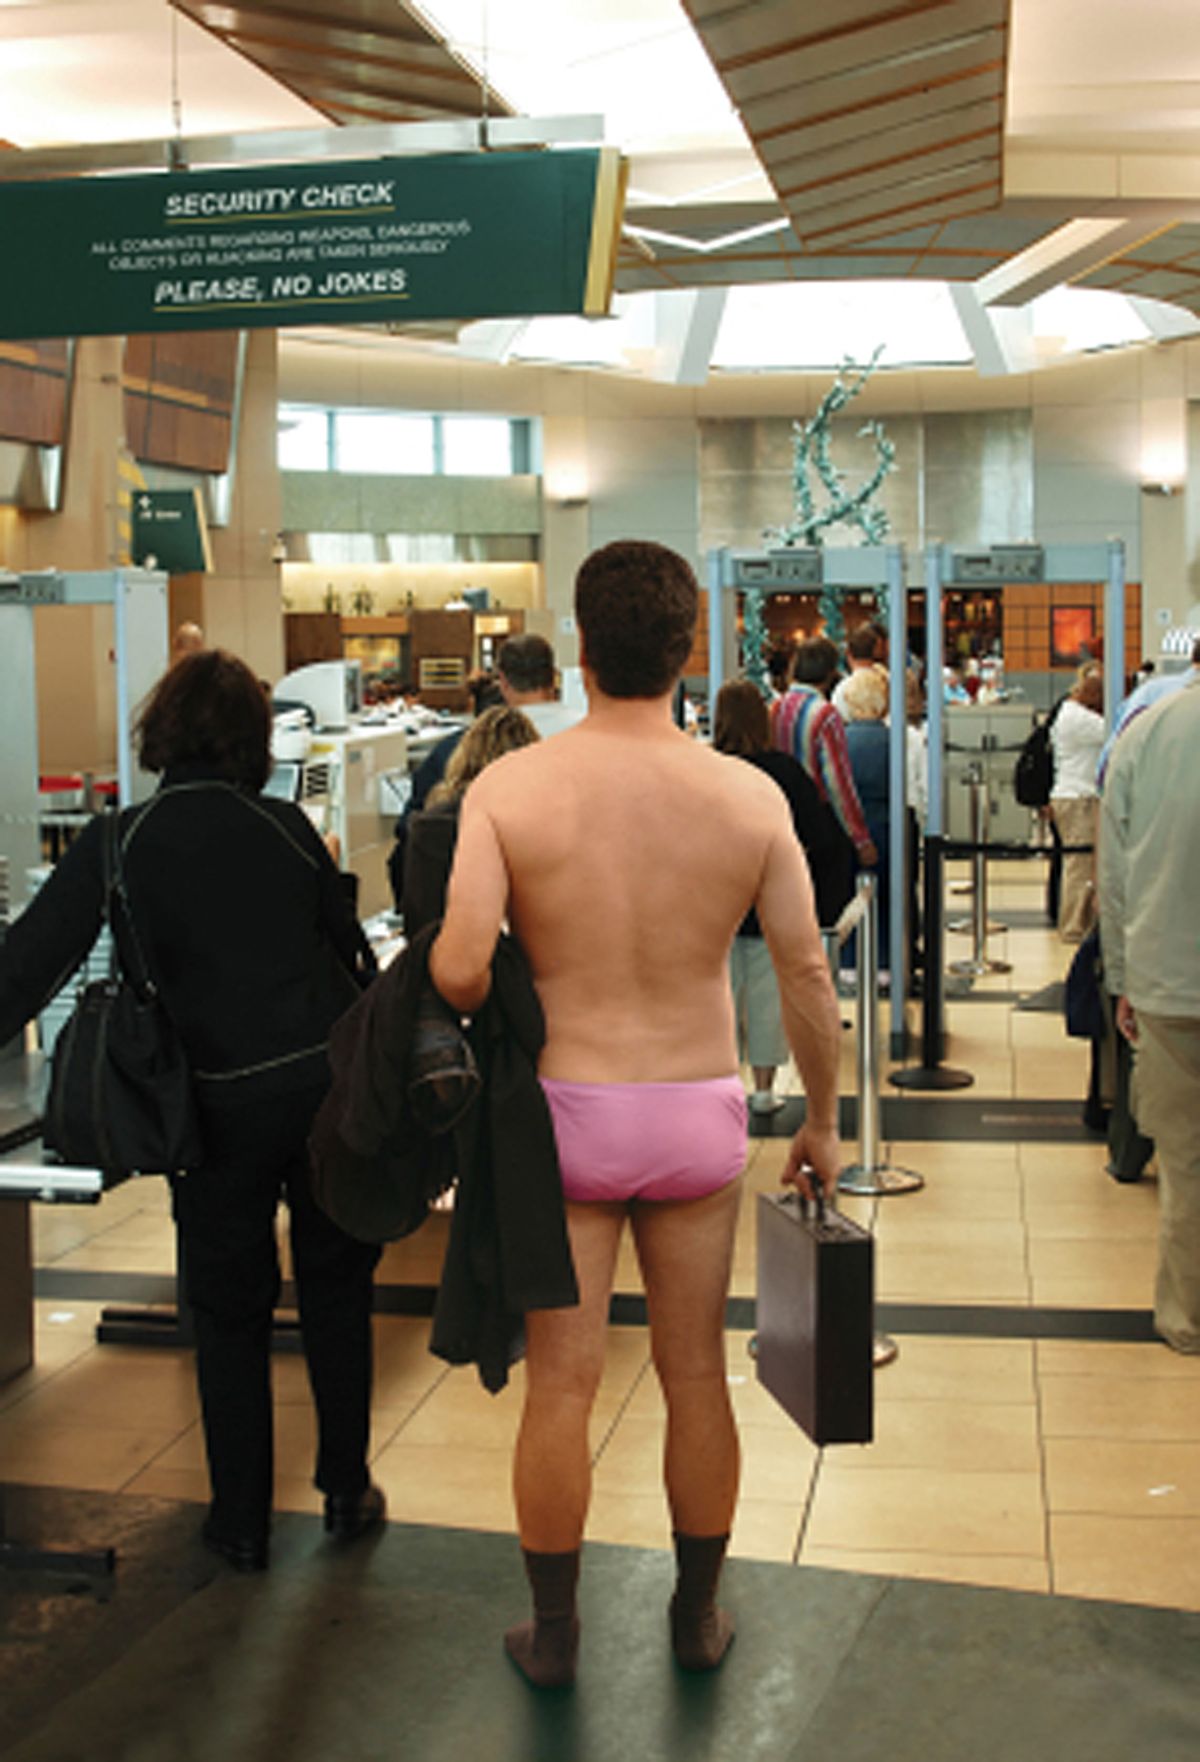 Man standing in his underwear, waiting to go through an airport security check station (James Steidl)